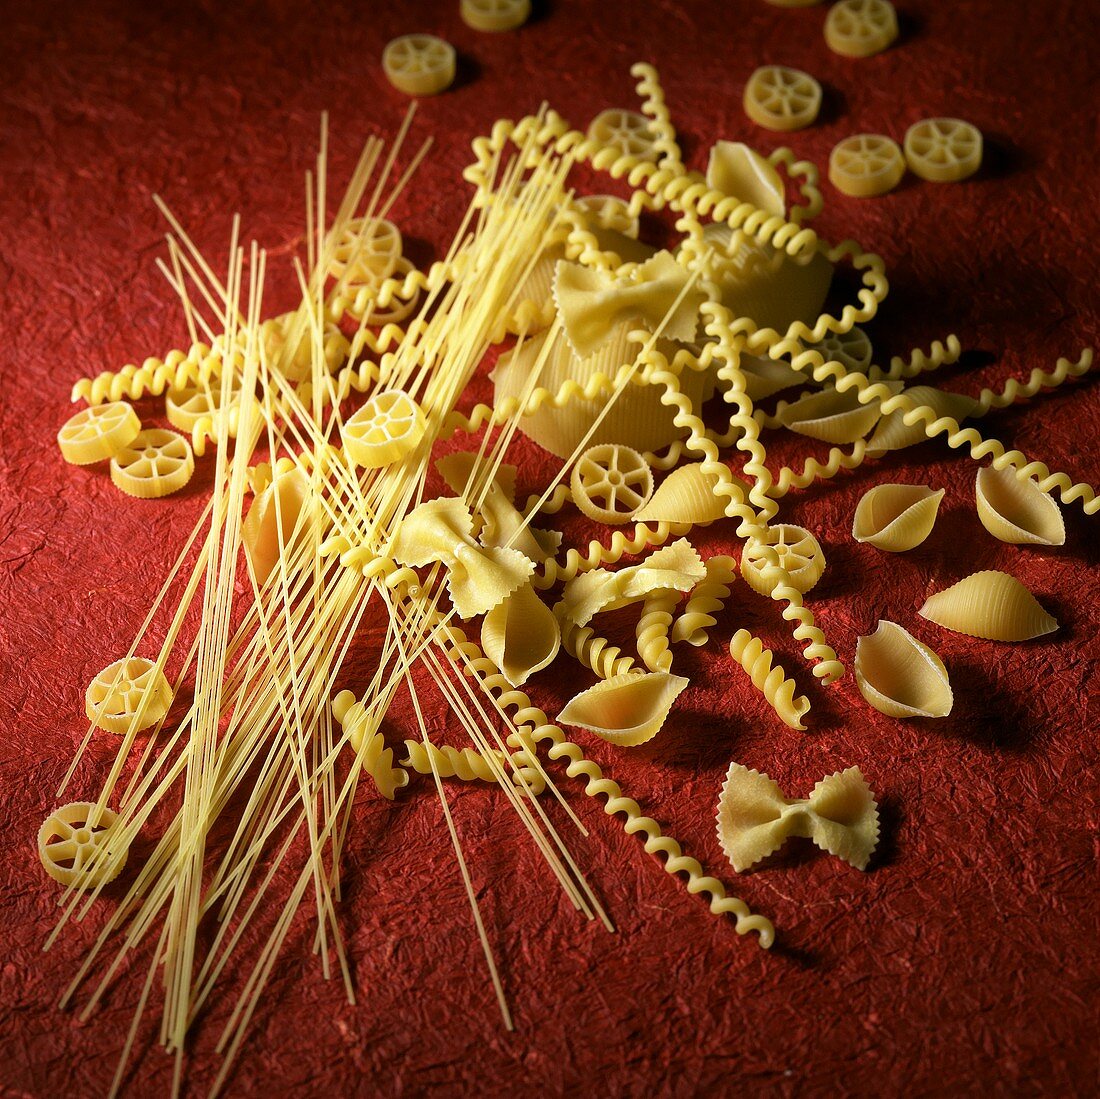 Assorted Dried Pasta on Red Background